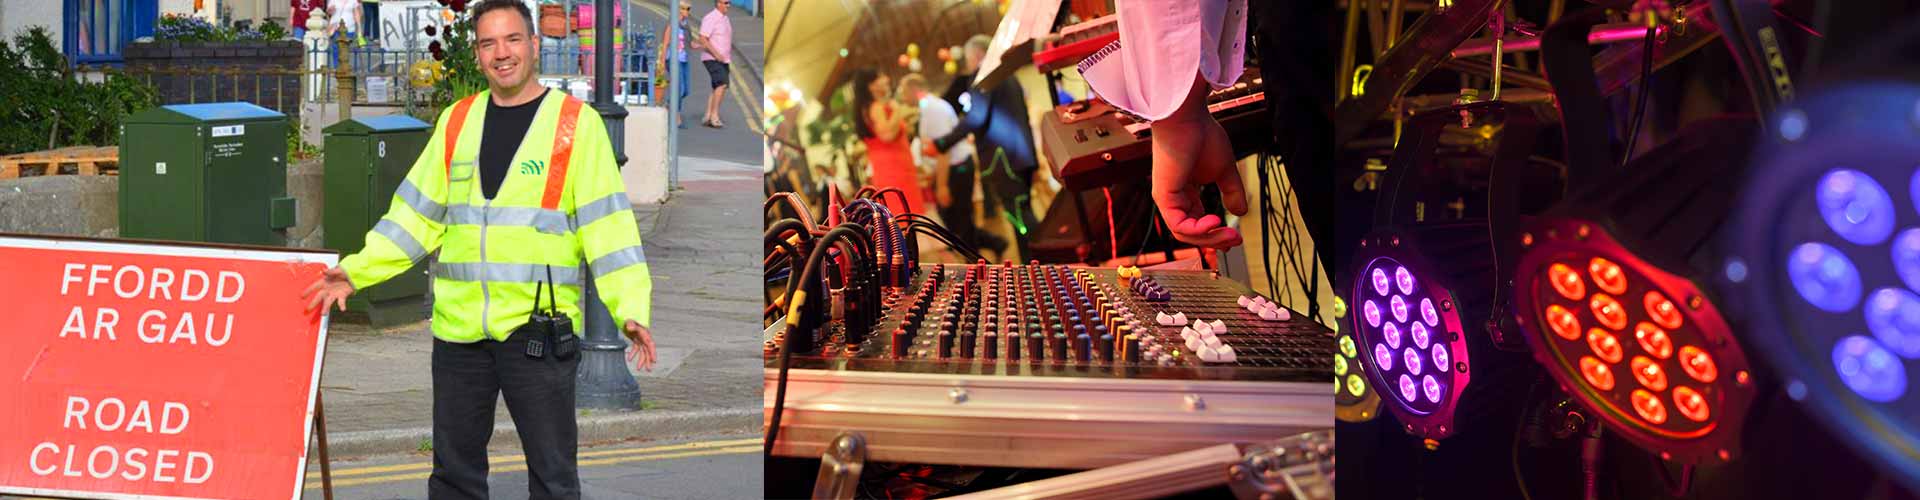 Audio Visual Hire Company in Neath Port Talbot - Loudspeaker Hire - Public Address Systems - Outdoor Event Lighting and Radio Communications Provider